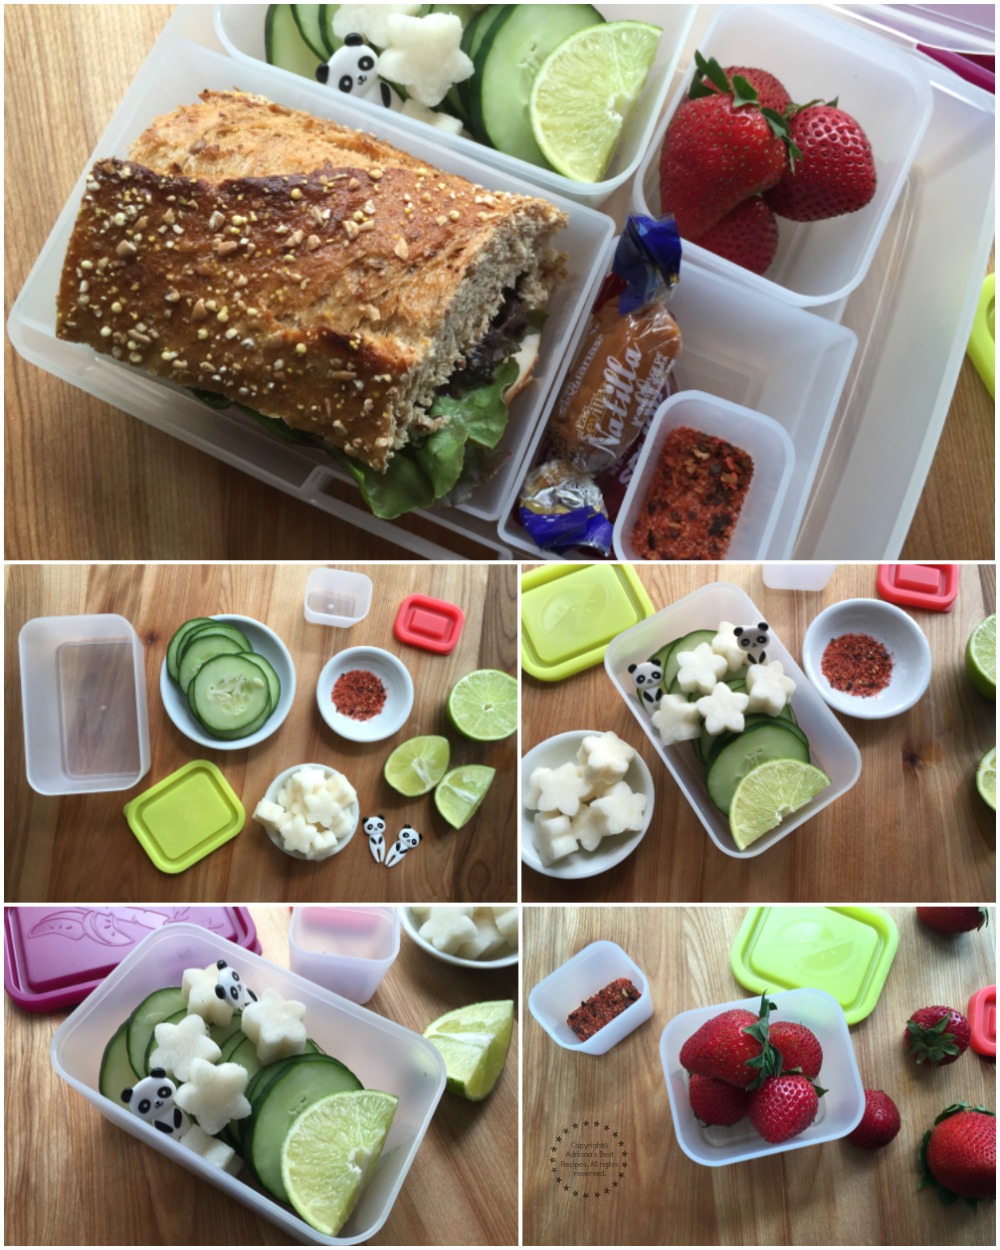 Putting together the Mexican Bento Box